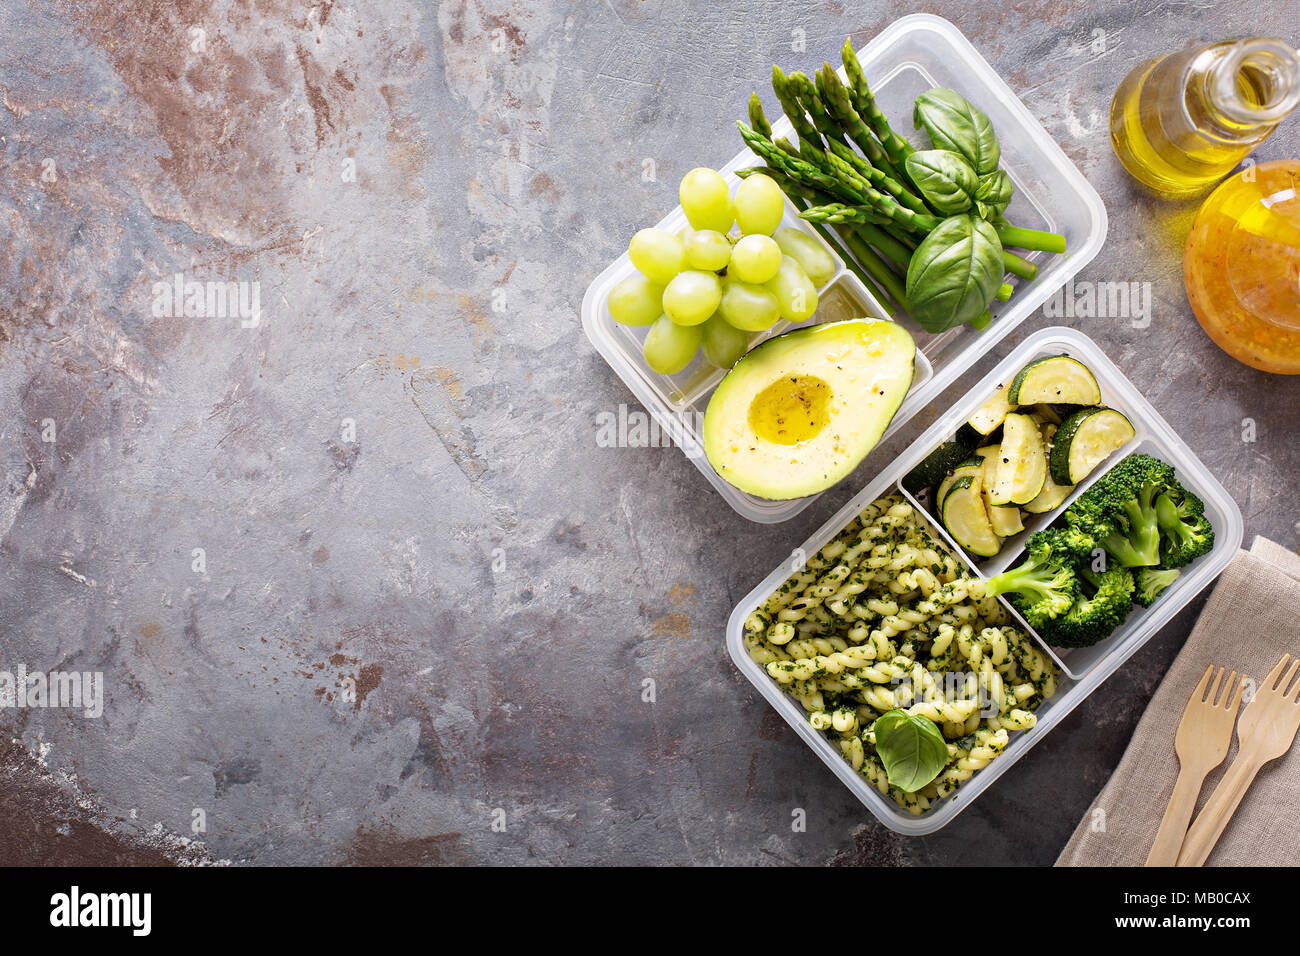 Vegan meal prep containers with pasta with green pesto sauce and vegetables Stock Photo